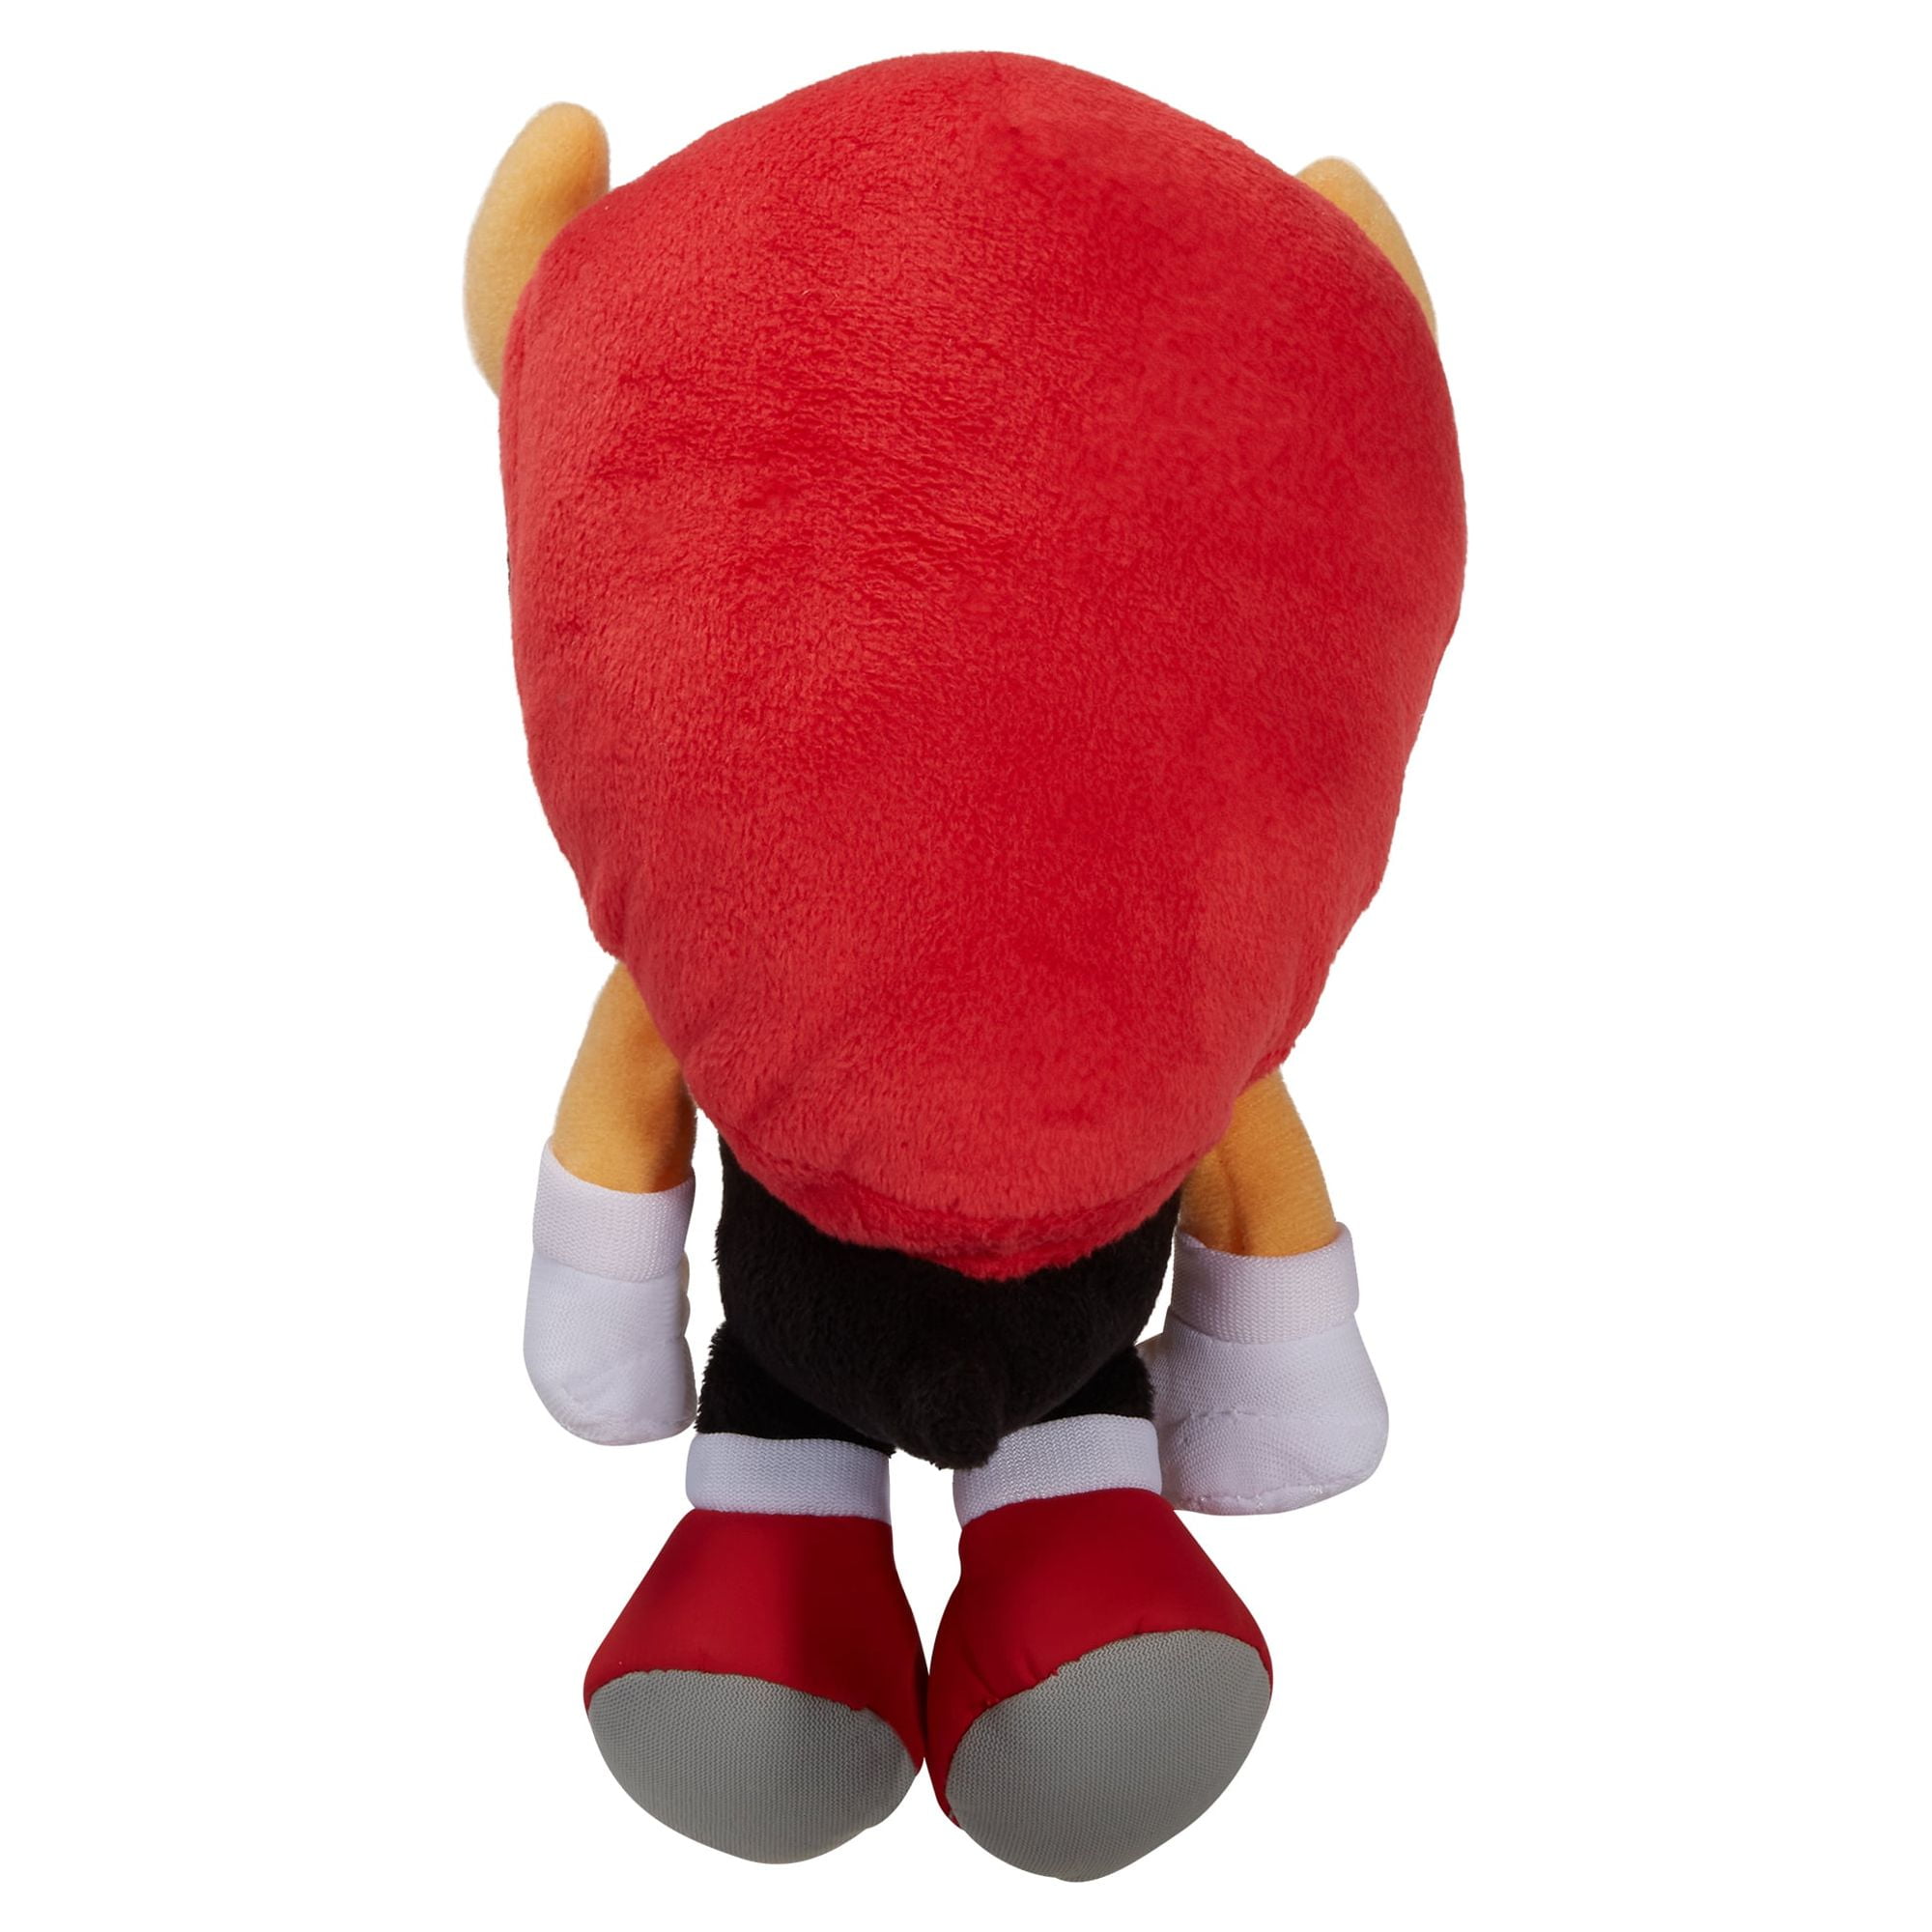 Sonic the Hedgehog 8 Inch Collector Plush, Mighty